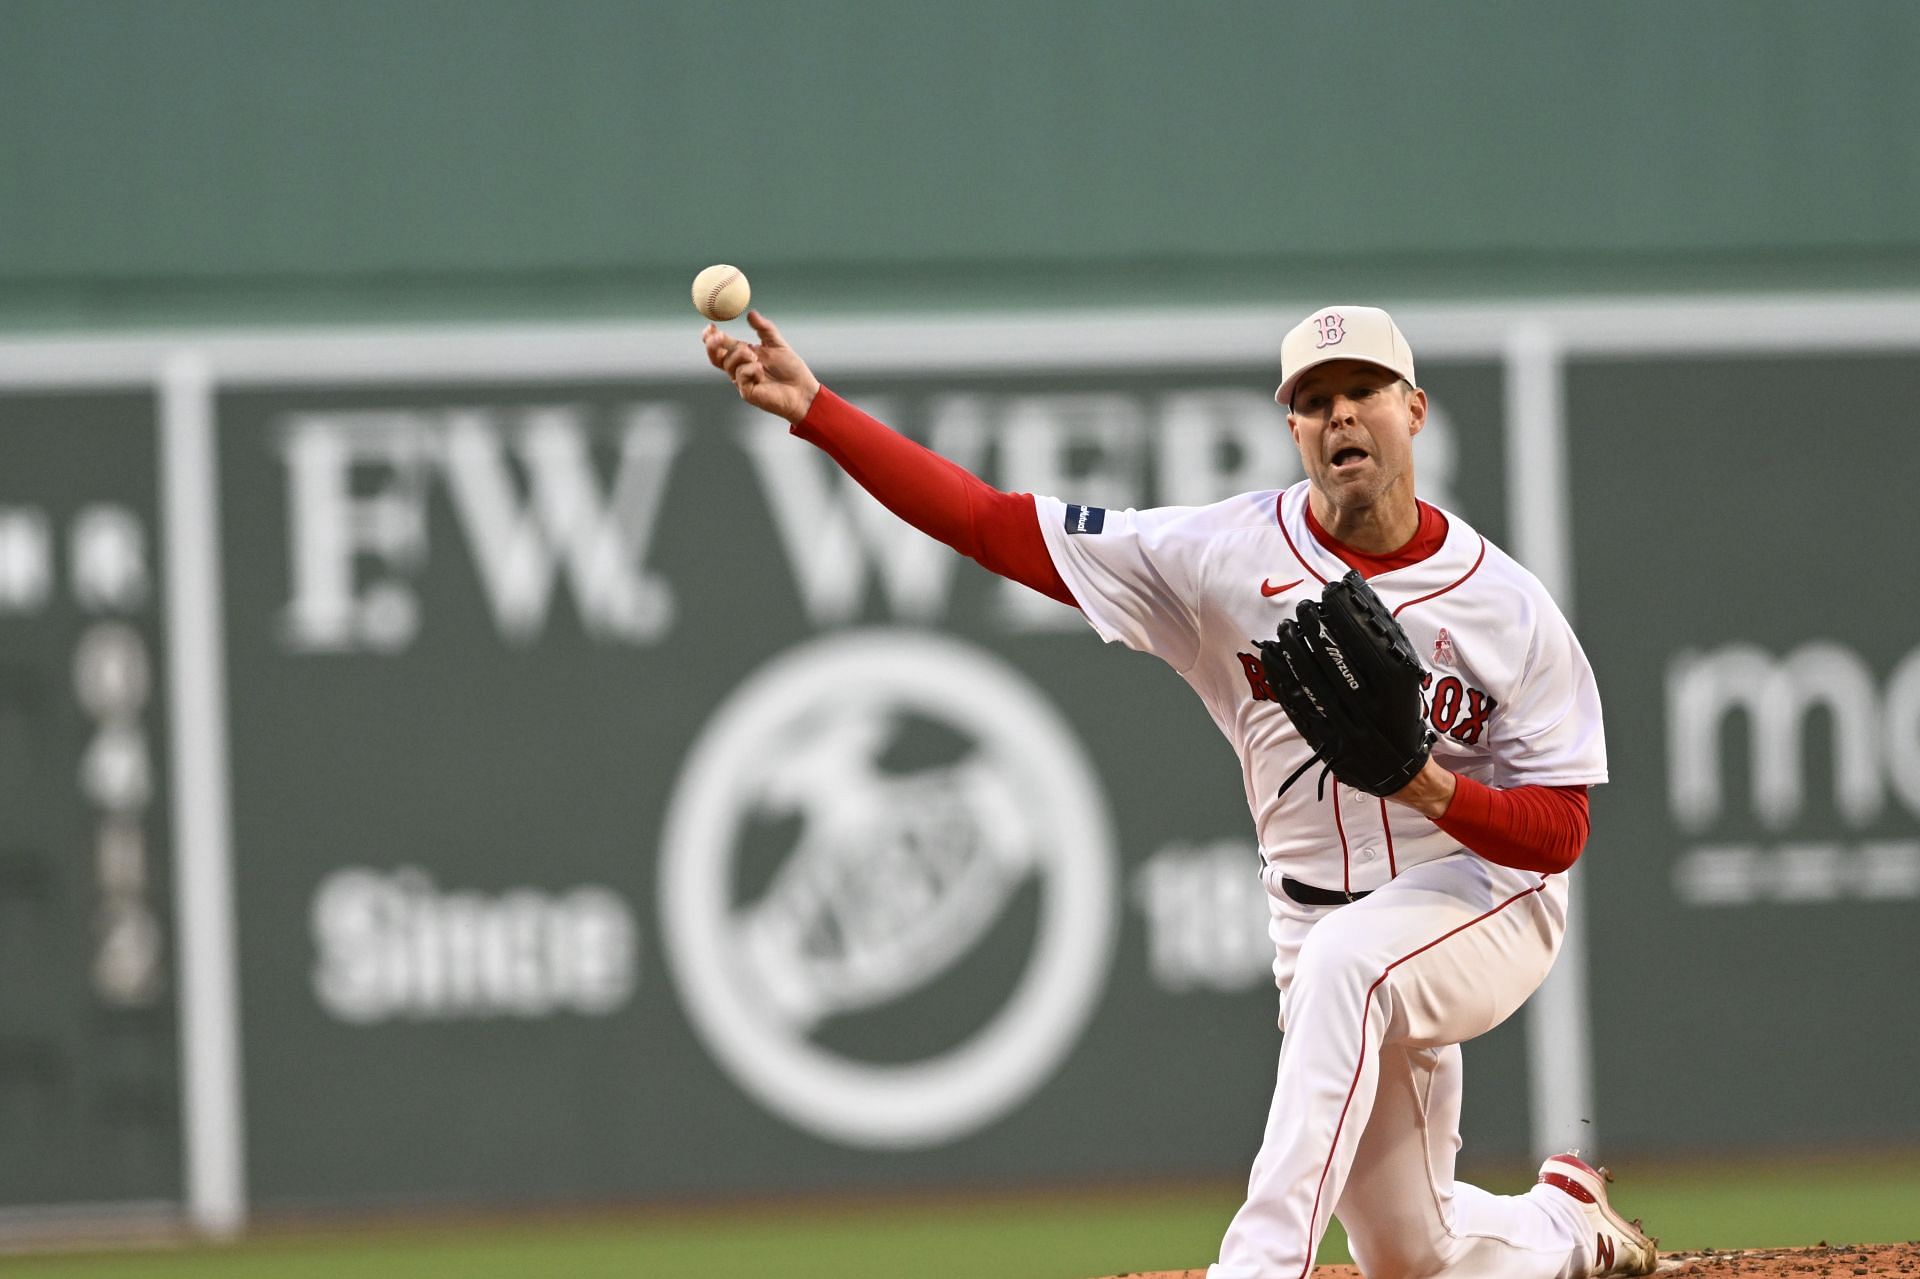 Cardinals vs. Red Sox picks for Sunday Night Baseball: Expect St. Louis to  beat up on Kluber